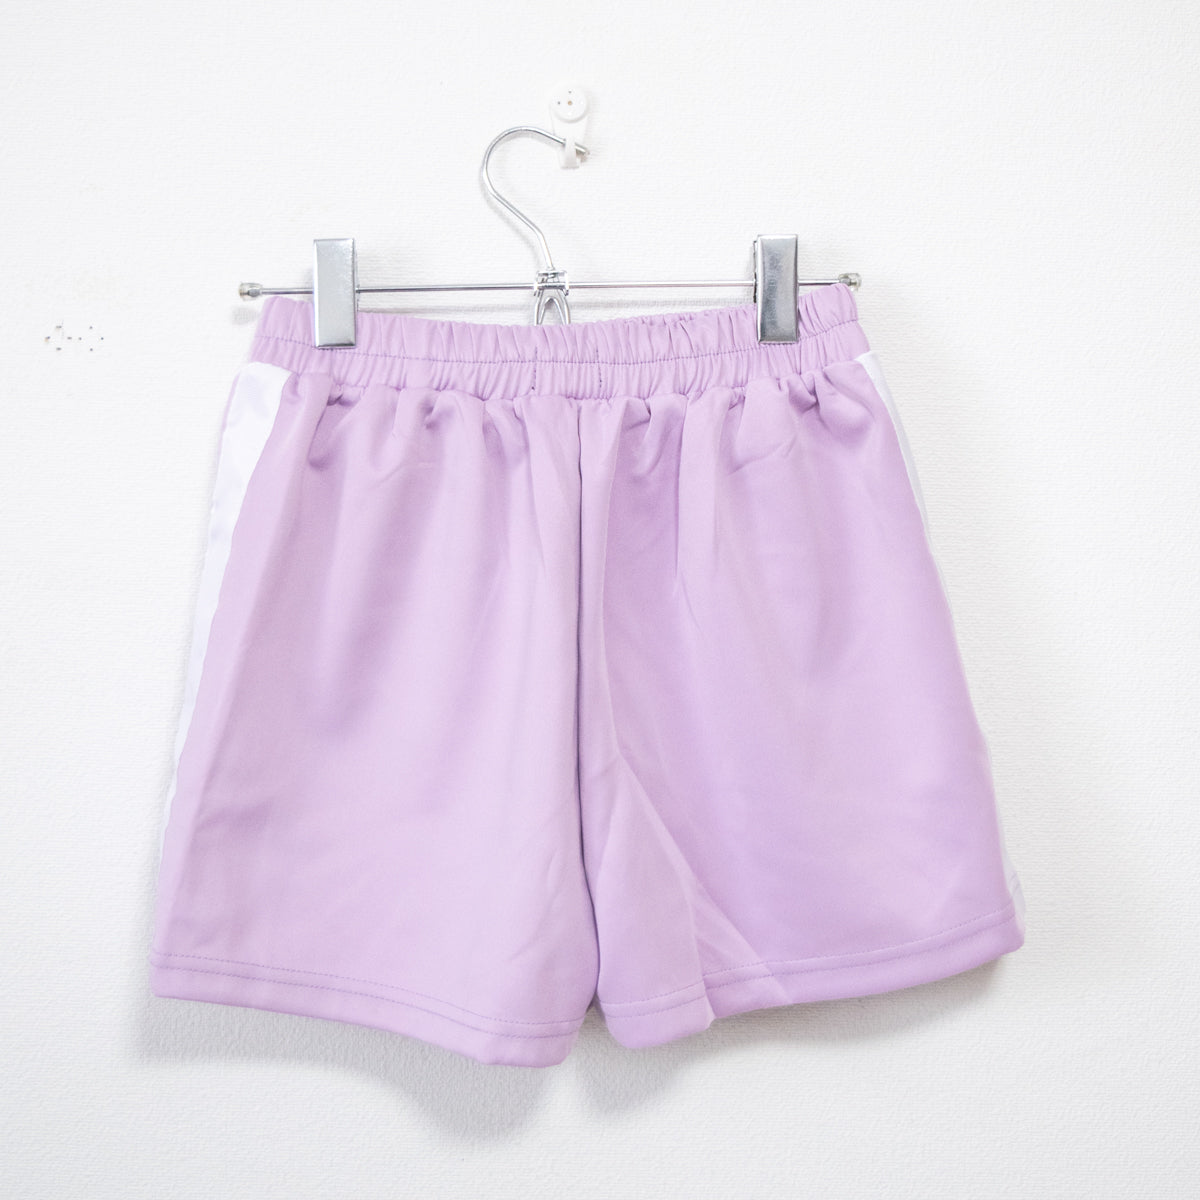 ACDC RAG Side Double Line Jersey Shorts LIGHT PURPLE